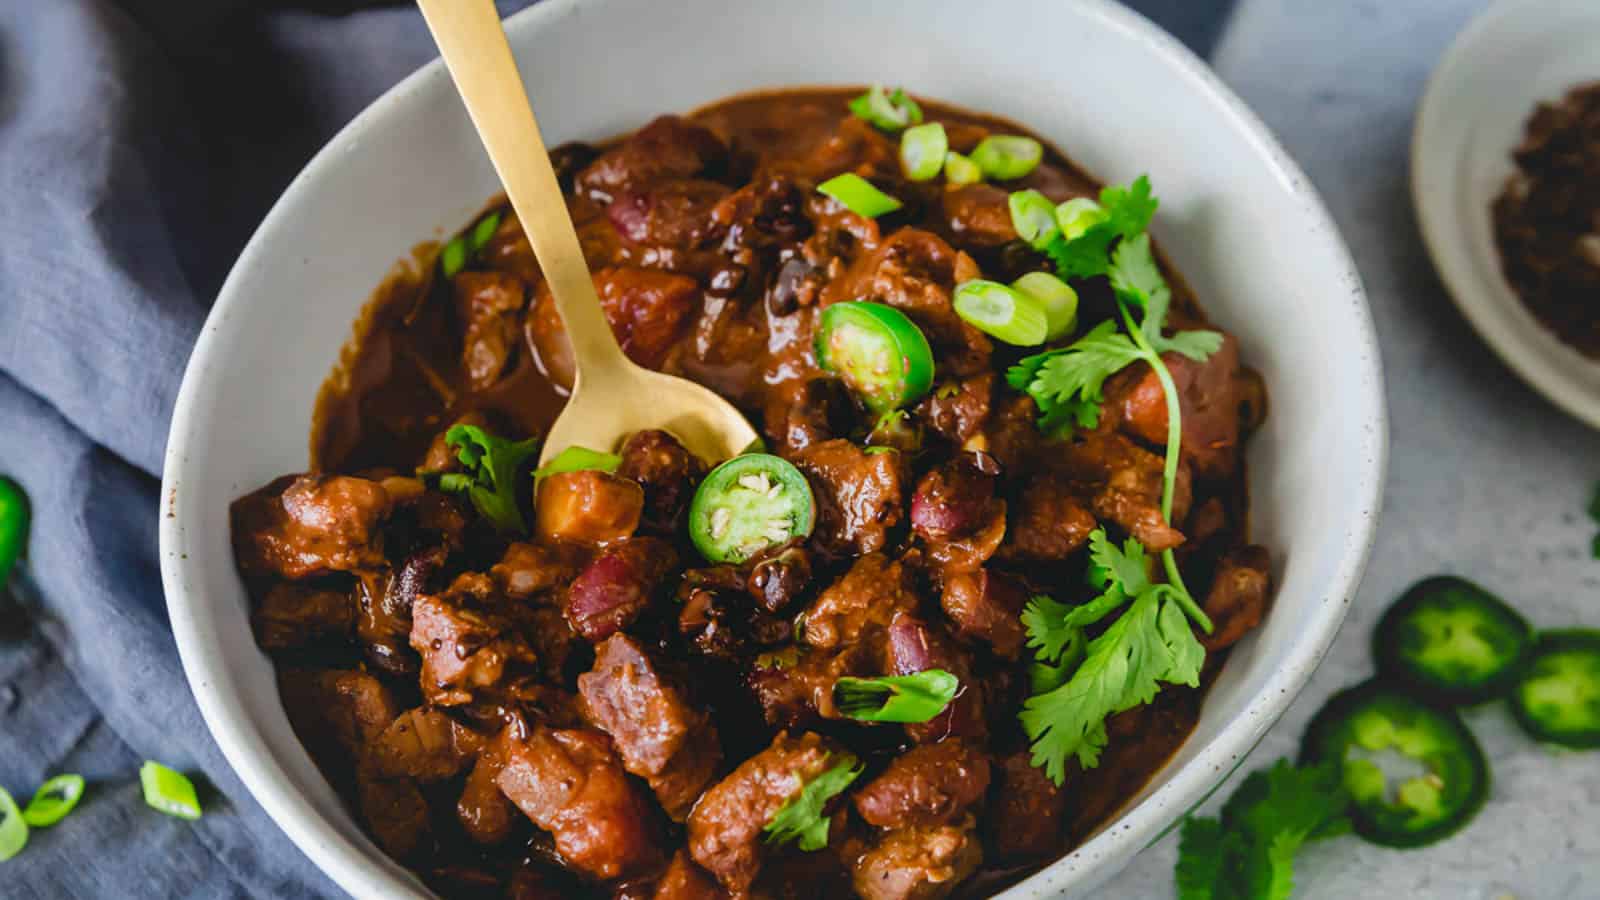 <p>Chocolate lamb chili stands out with its unique blend of chopped lamb, beans, and smoky spices. Its flavor profile, reminiscent of Mexican mole sauce, sets this dish apart as a truly one-of-a-kind chili.<br><strong>Get the Recipe: </strong><a href="https://www.runningtothekitchen.com/chocolate-lamb-chili/?utm_source=msn&utm_medium=page&utm_campaign=RTTKmsn">Chocolate Lamb Chili</a></p>